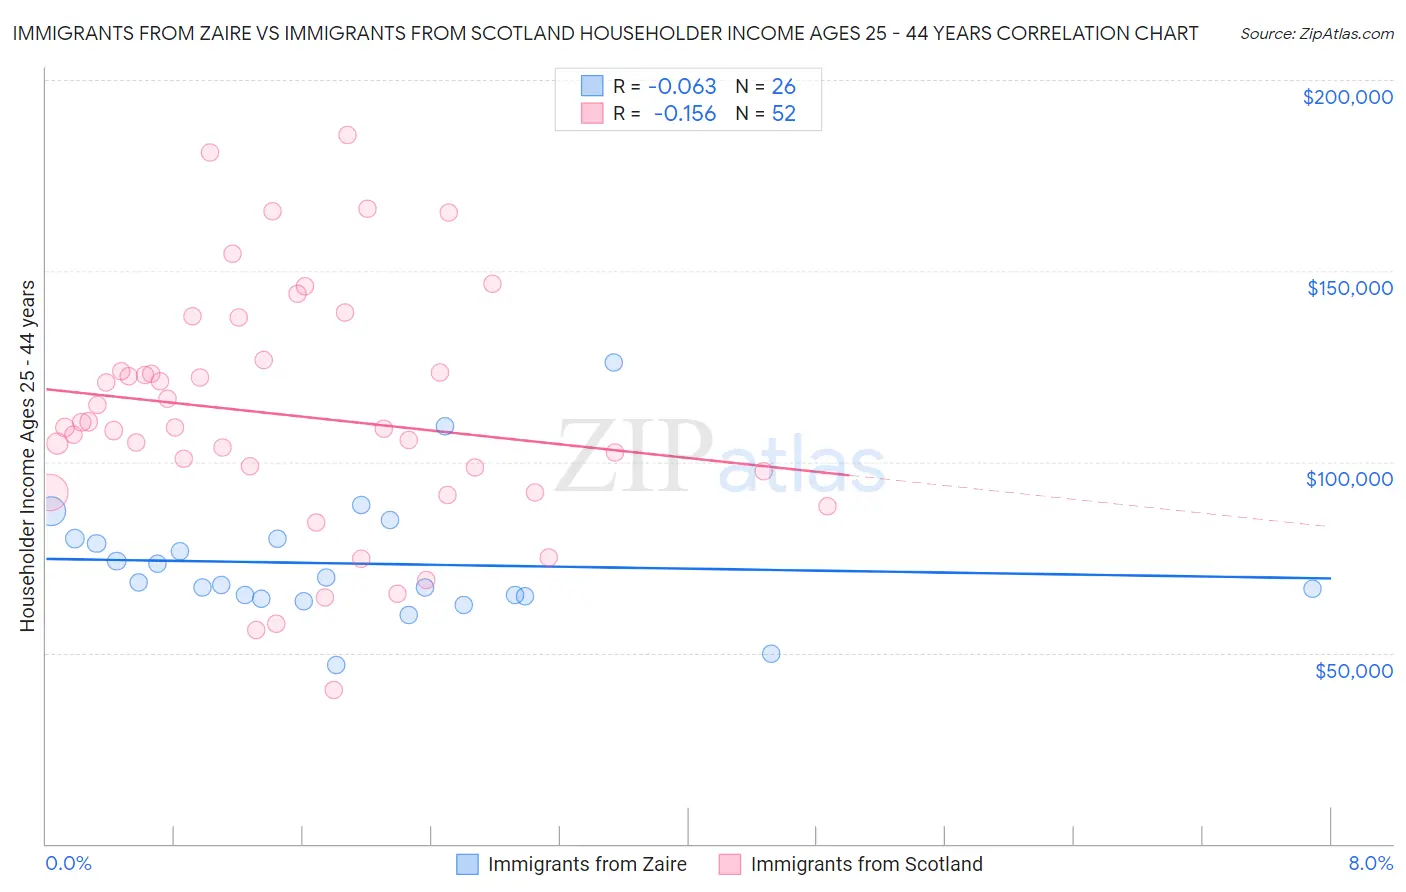 Immigrants from Zaire vs Immigrants from Scotland Householder Income Ages 25 - 44 years